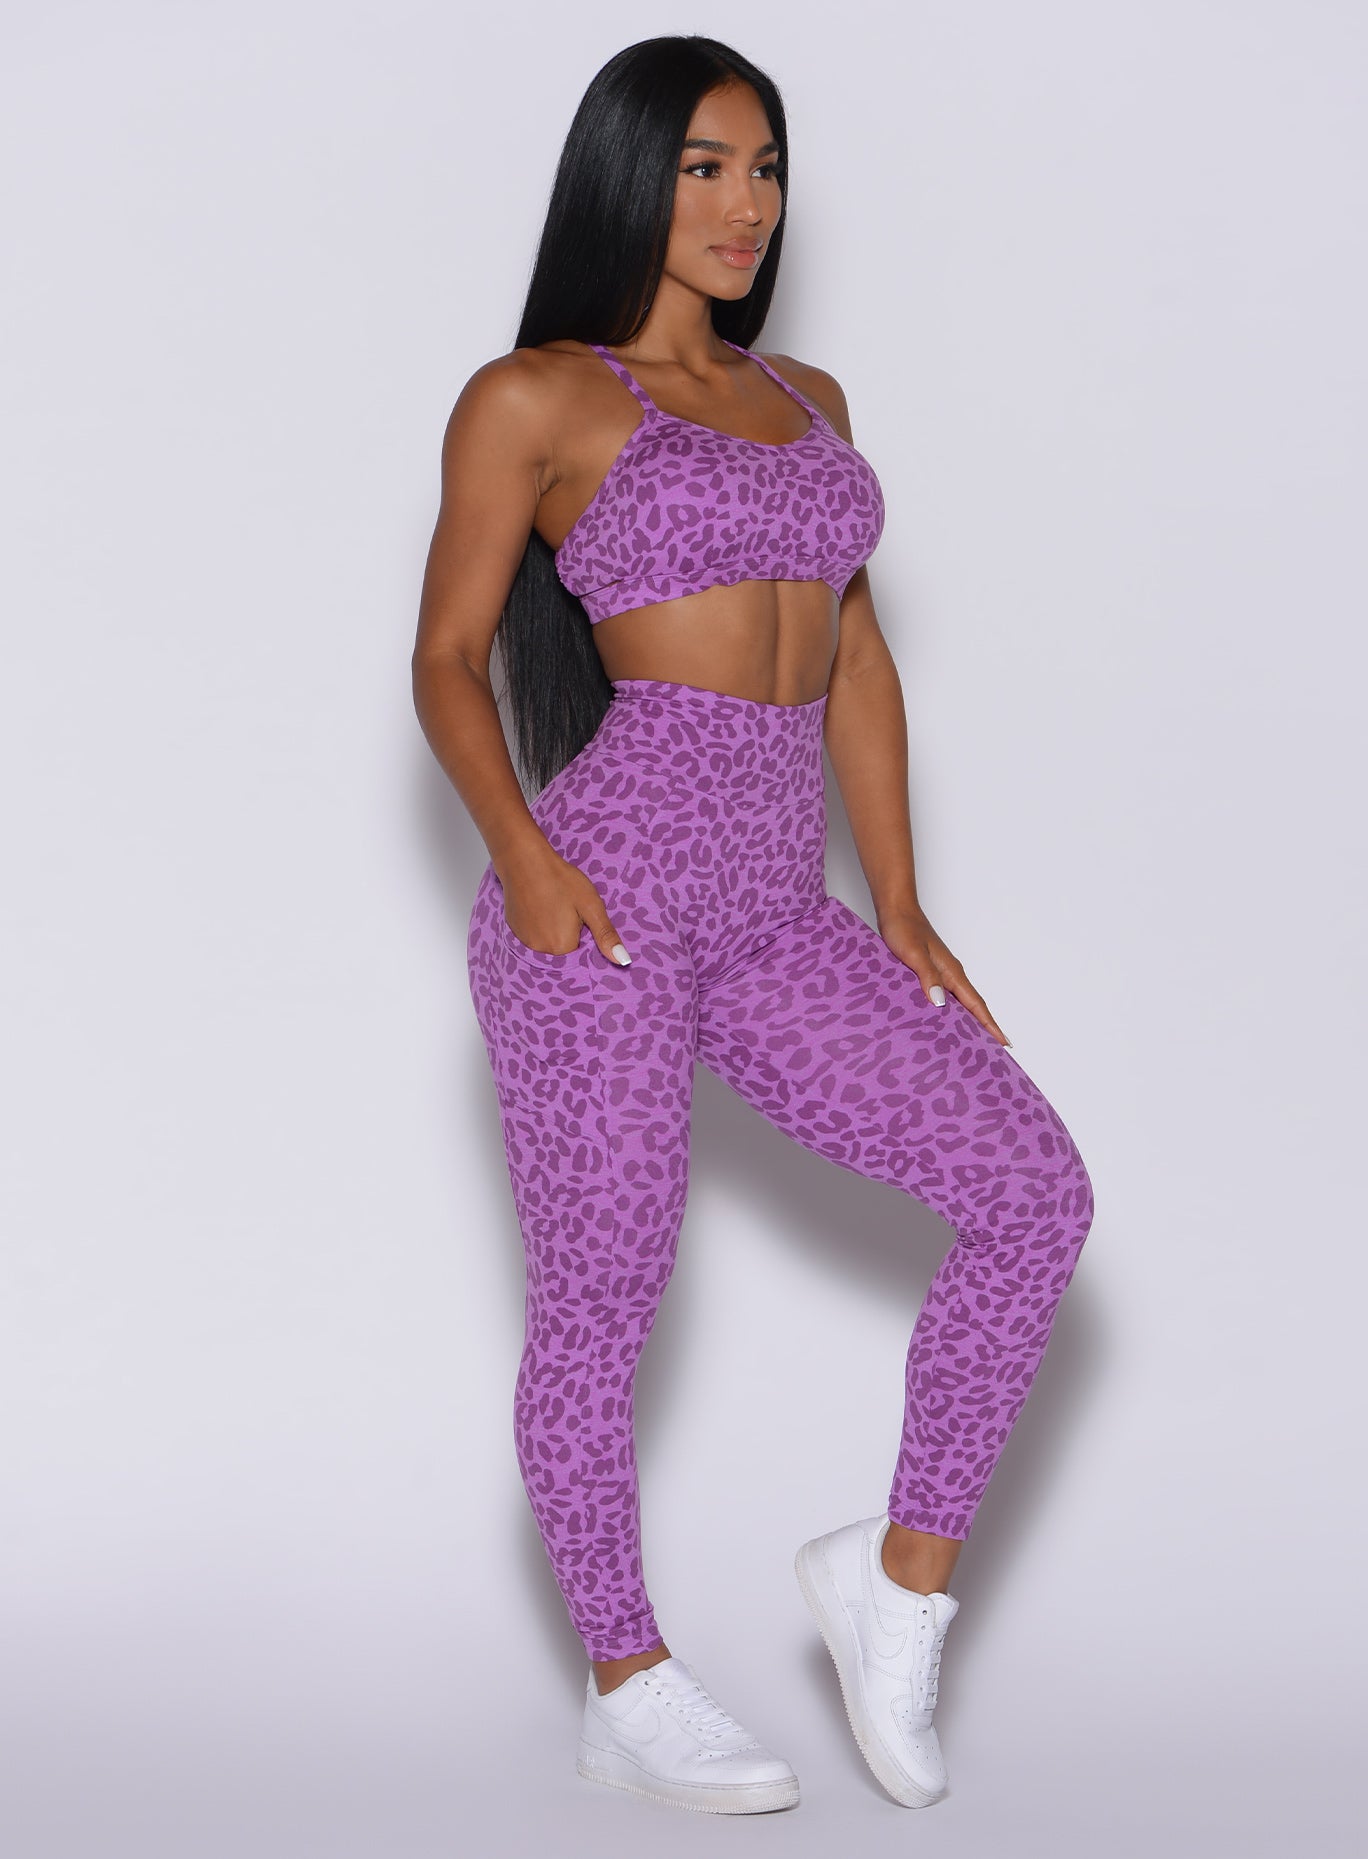 Right side profile view of a model in our curves leggings in purple cheetah color and a matching sports bra